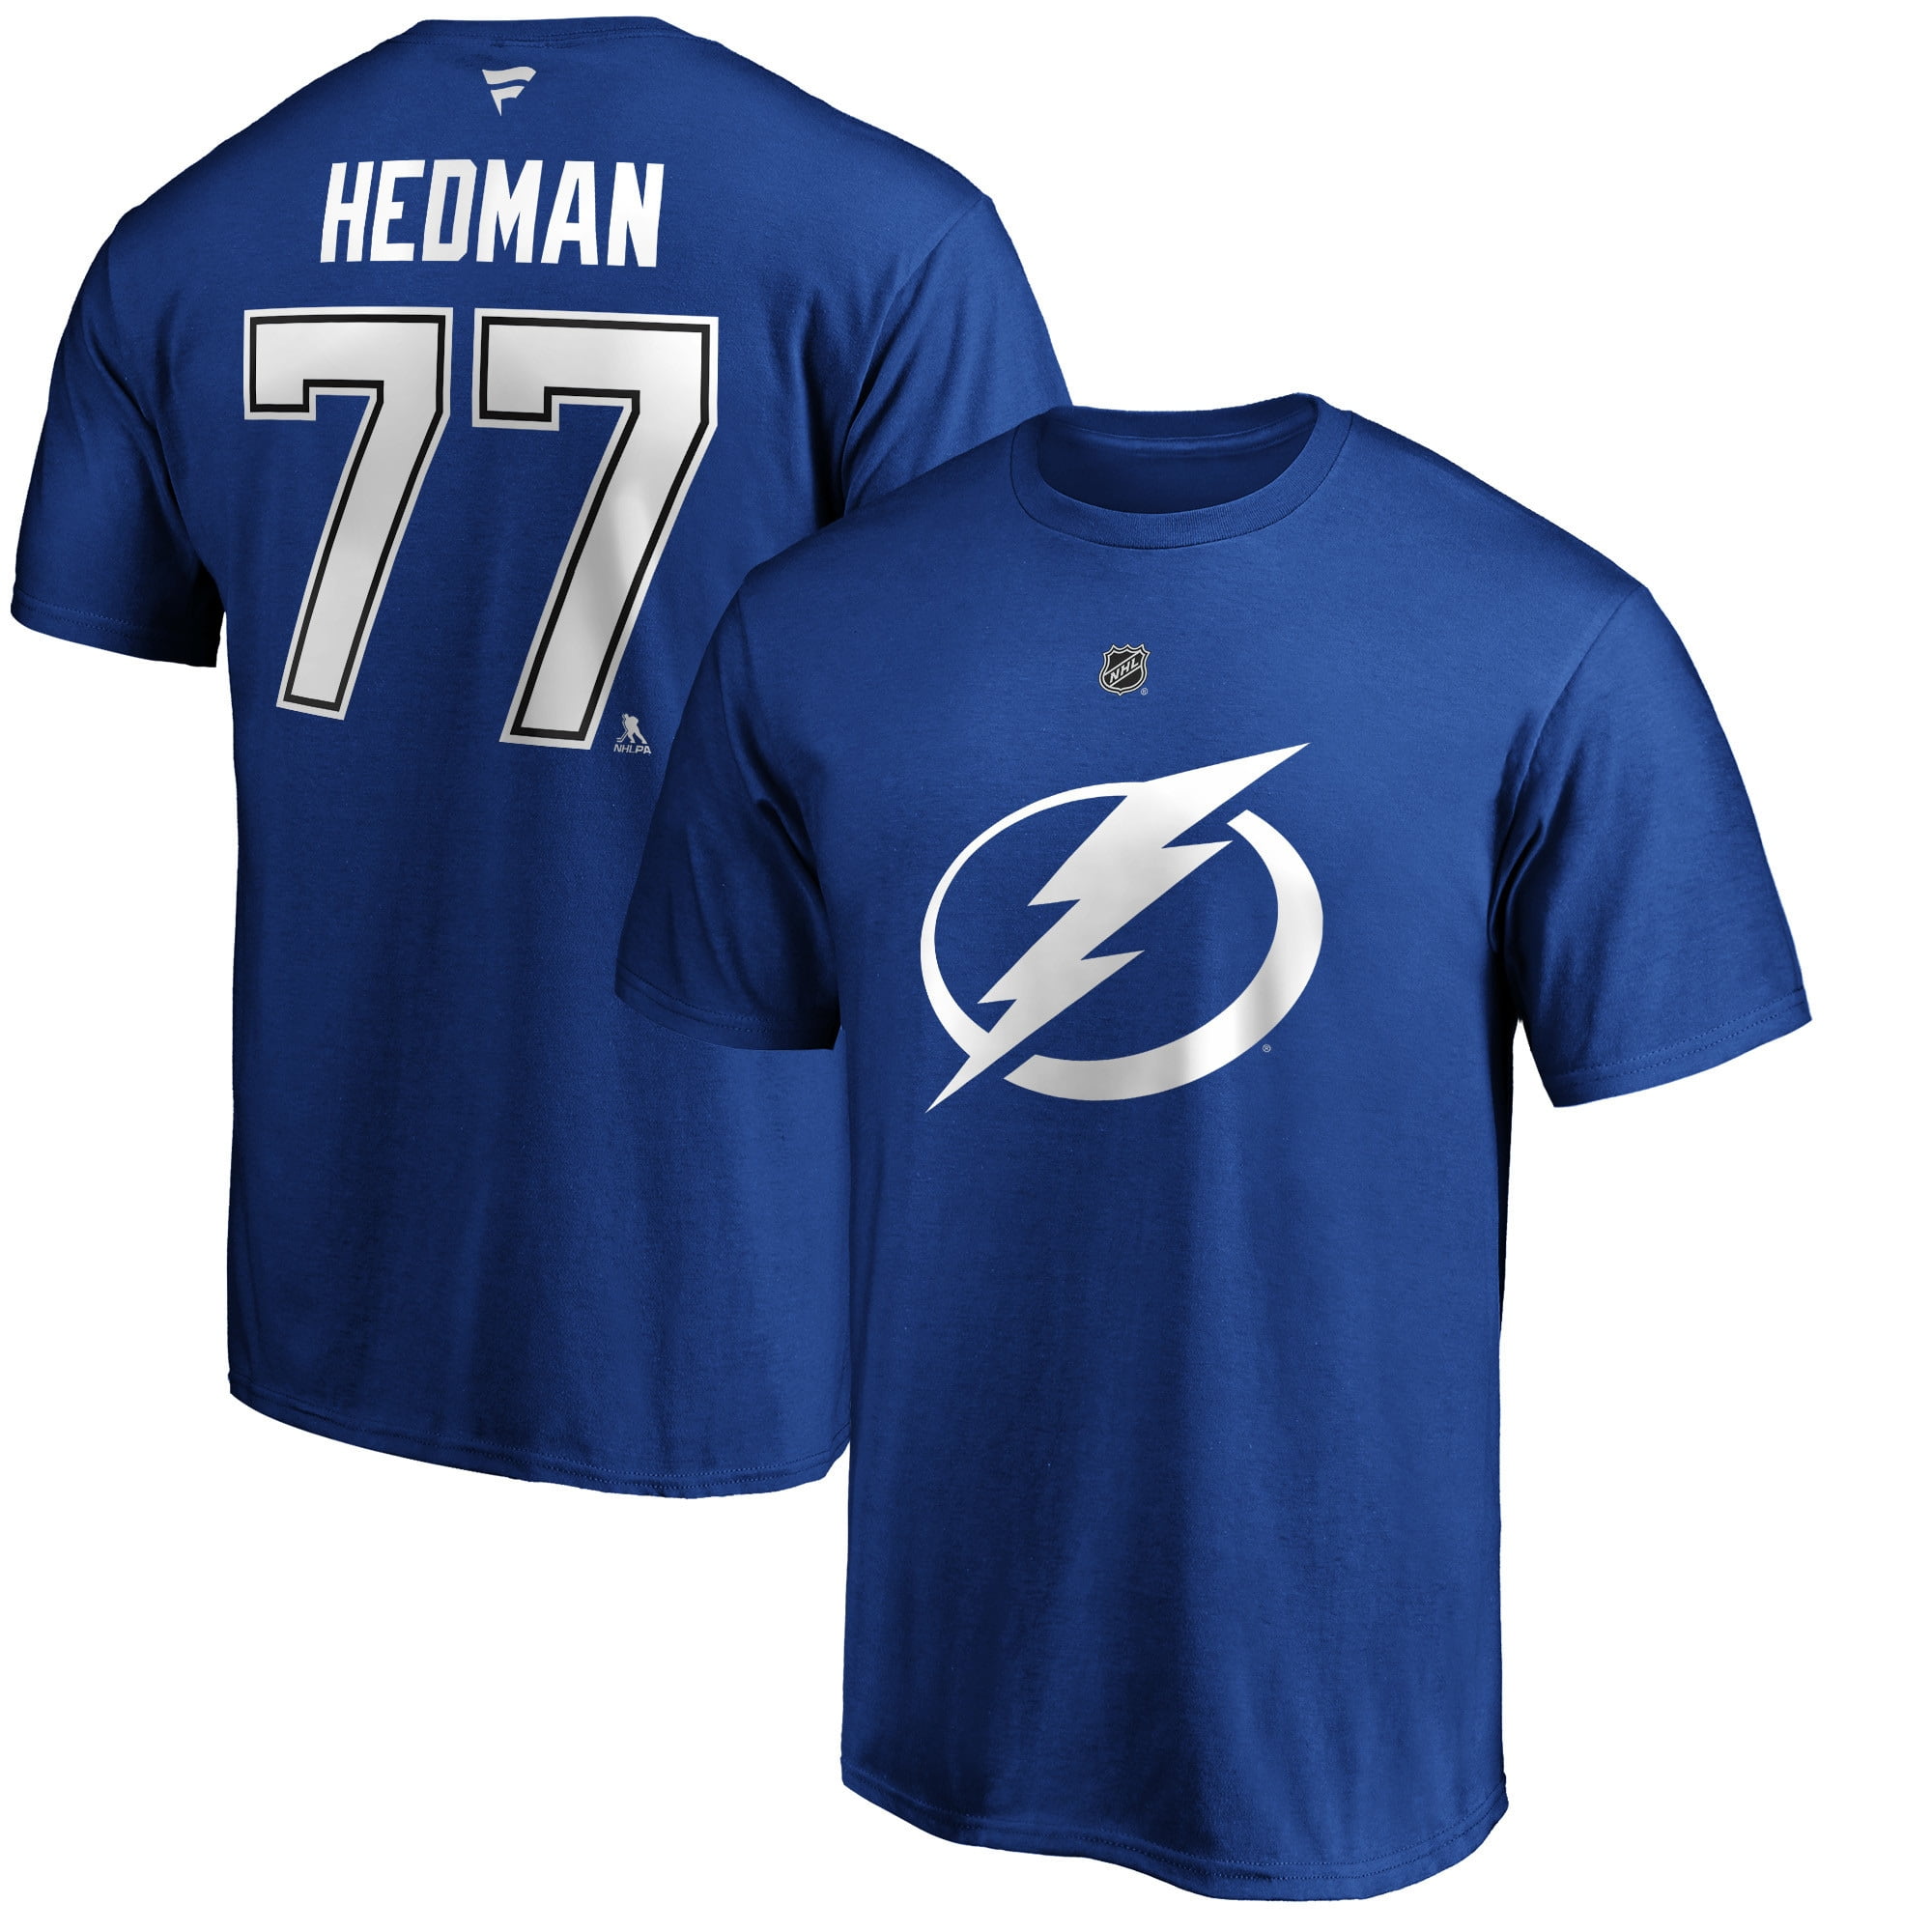 victor hedman authentic jersey